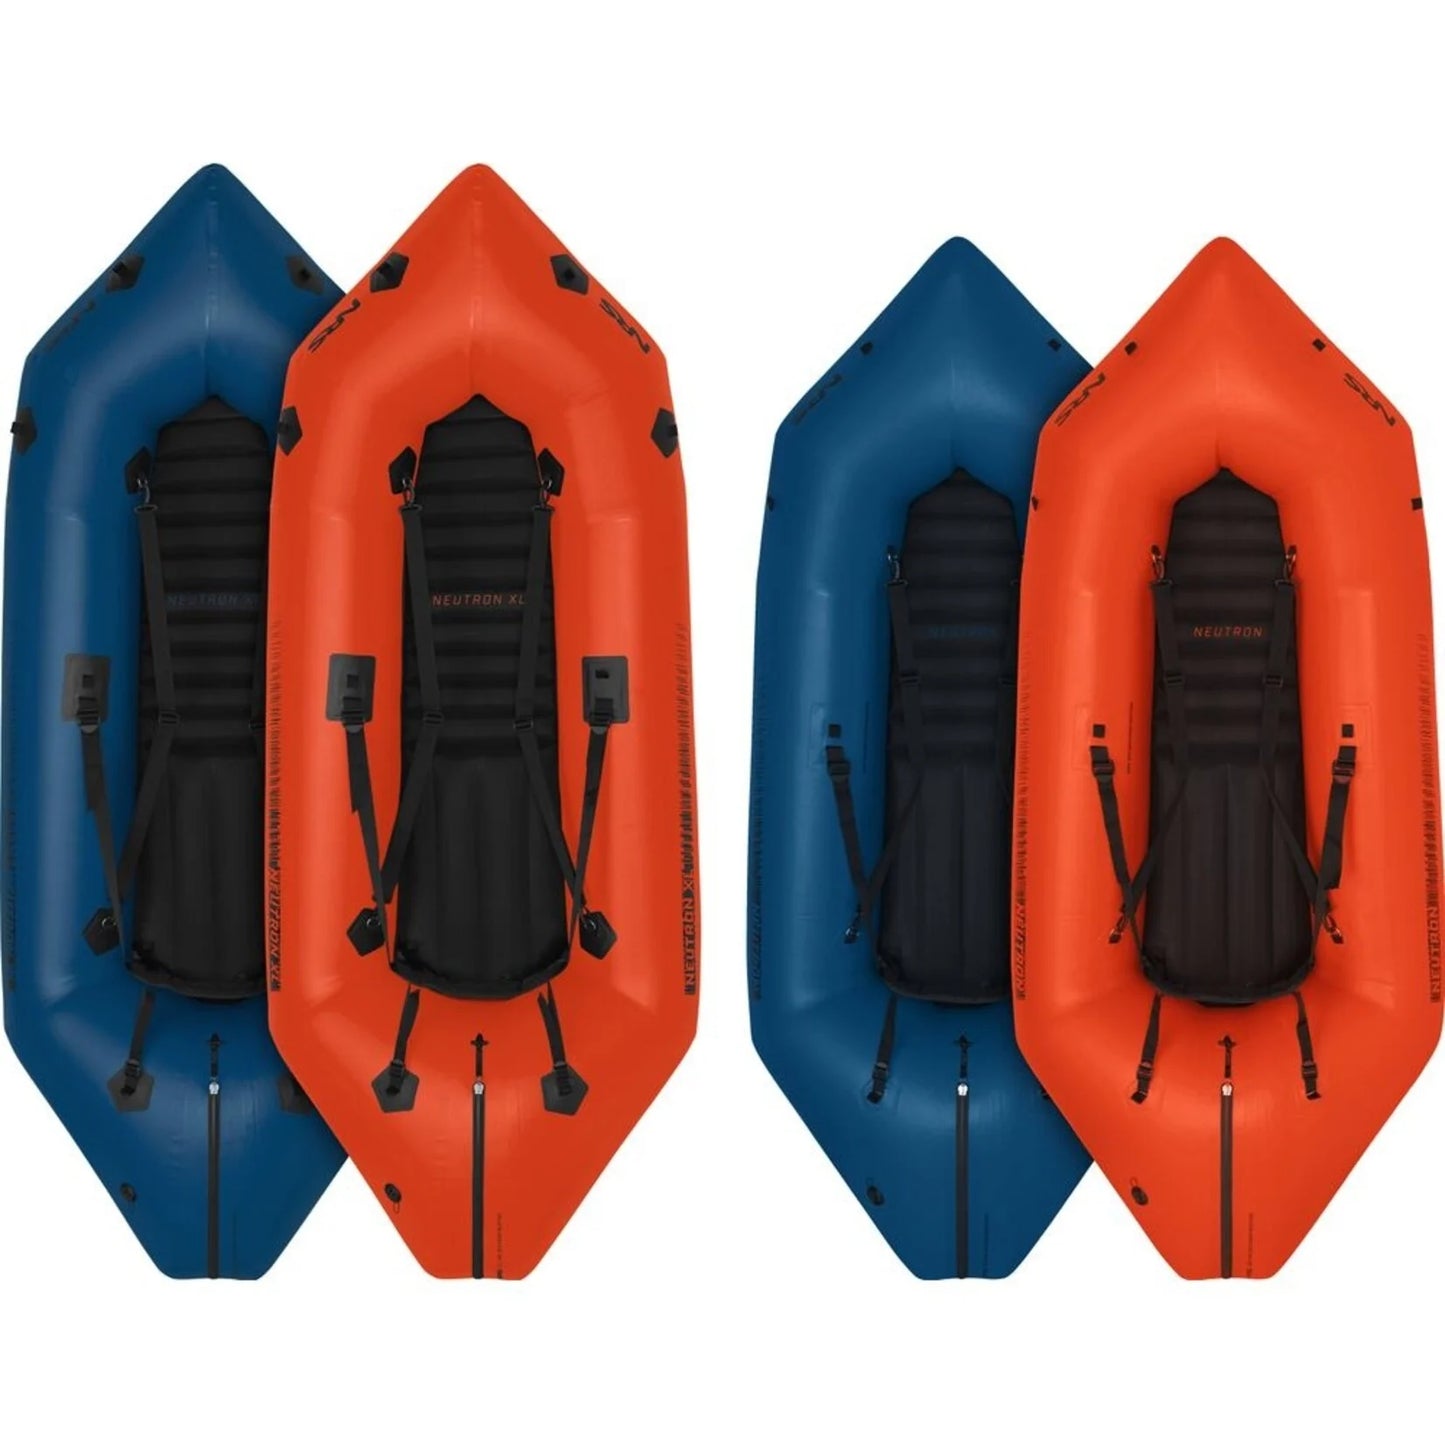 Three Neutron Packrafts in blue, orange, and black colors by NRS.